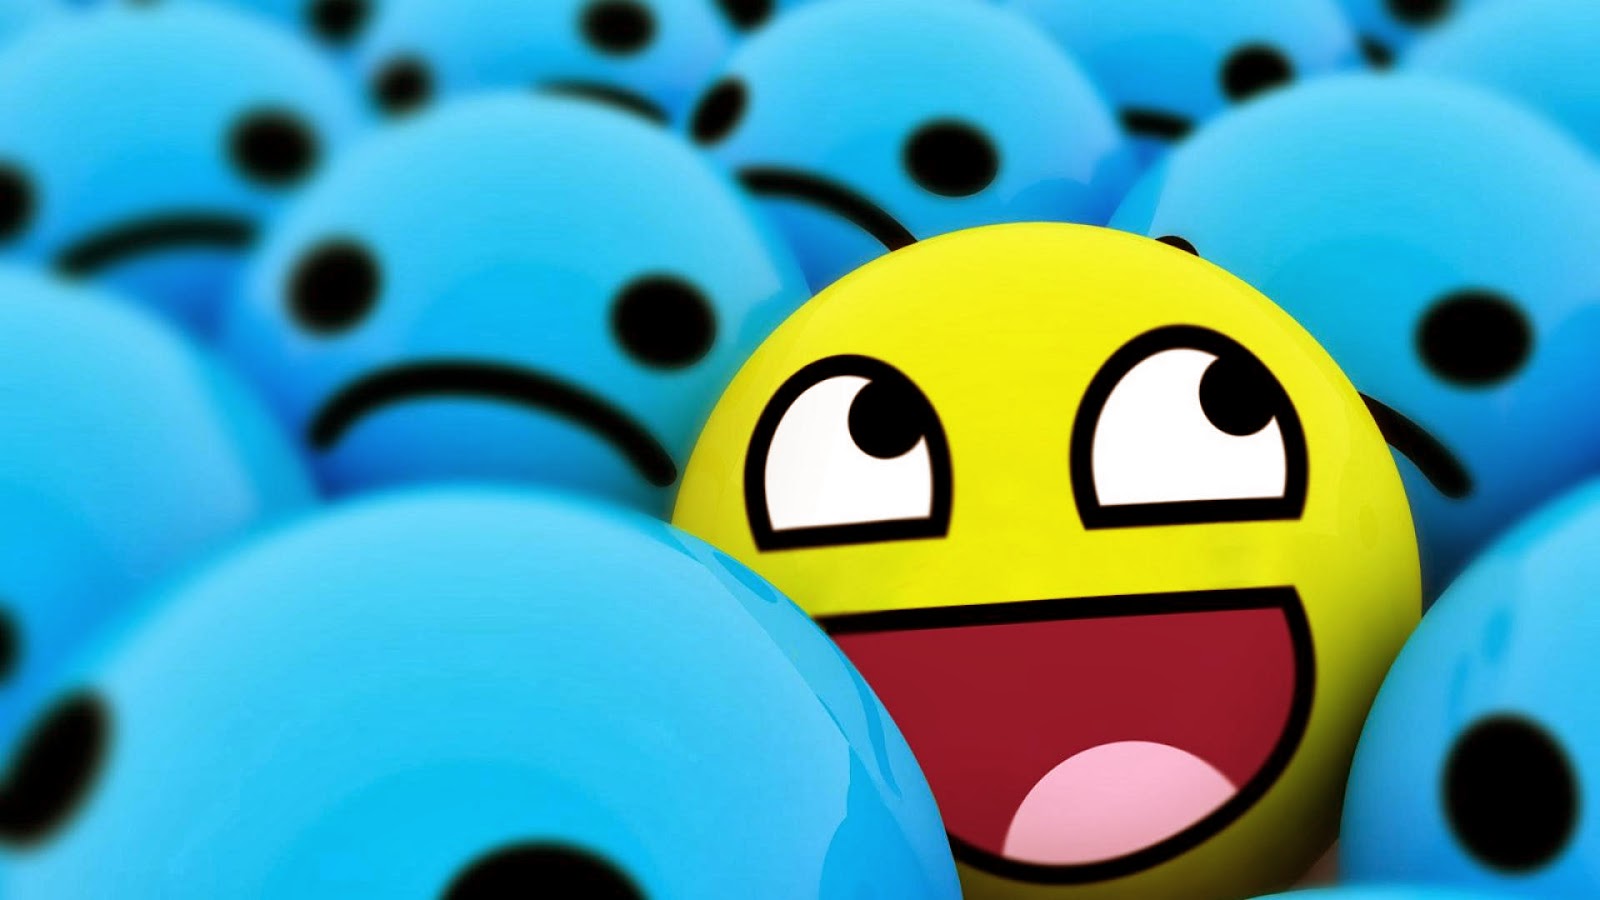 smiley face background hd wallpaper for mobile Facebook free ...